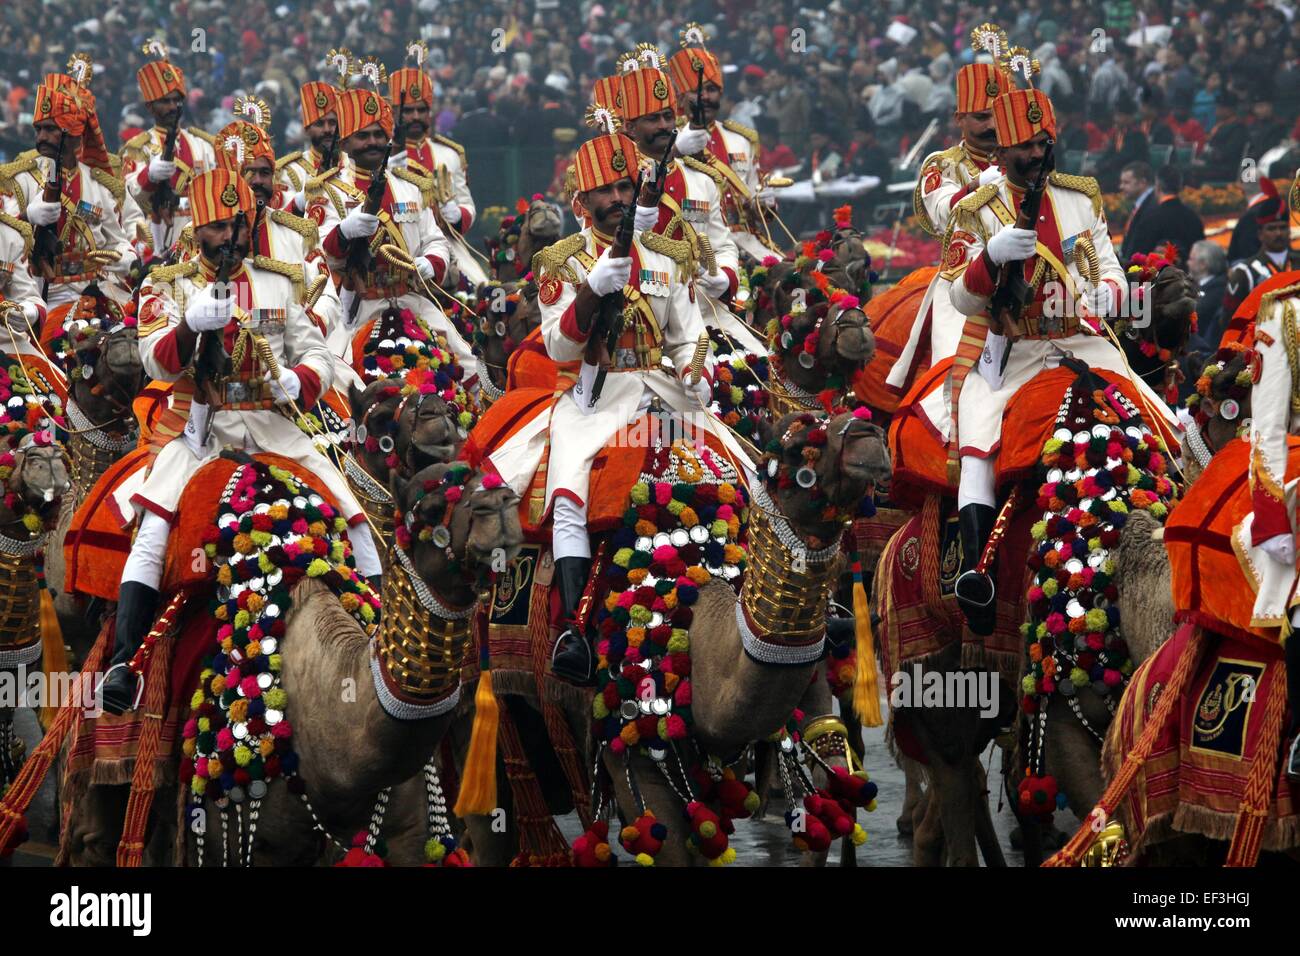 New Delhi, India. 26th Jan, 2015. Camel contingent of Indian Border Security Force (BSF) march during the 66th Republic Day parade in New Delhi, India, Jan. 26, 2015. Republic Day marks the anniversary of India's democratic constitution taking force in 1950. © Partha Sarkar/Xinhua/Alamy Live News Stock Photo